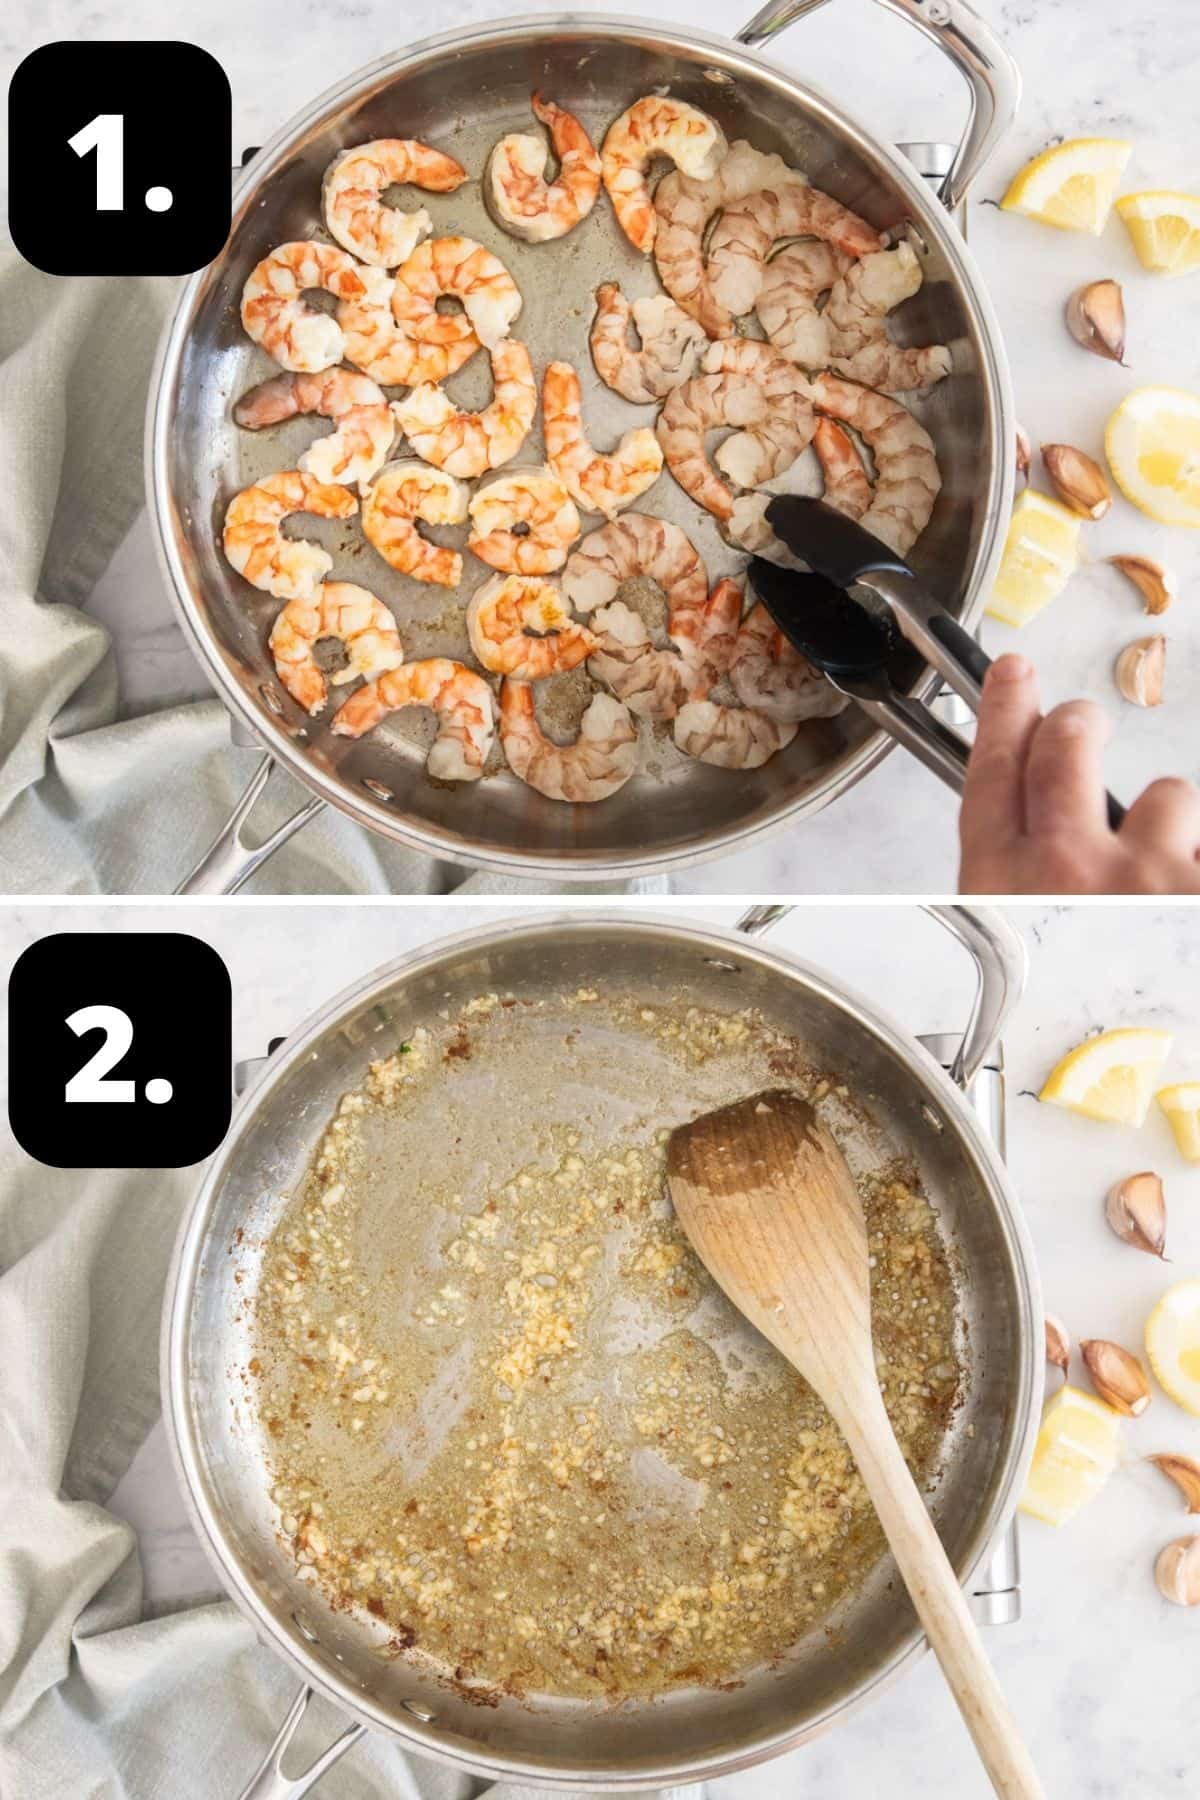 Steps 1-2 of preparing this recipe - cooking the prawns in a frying pan and then sautéing the garlic in the same pan.